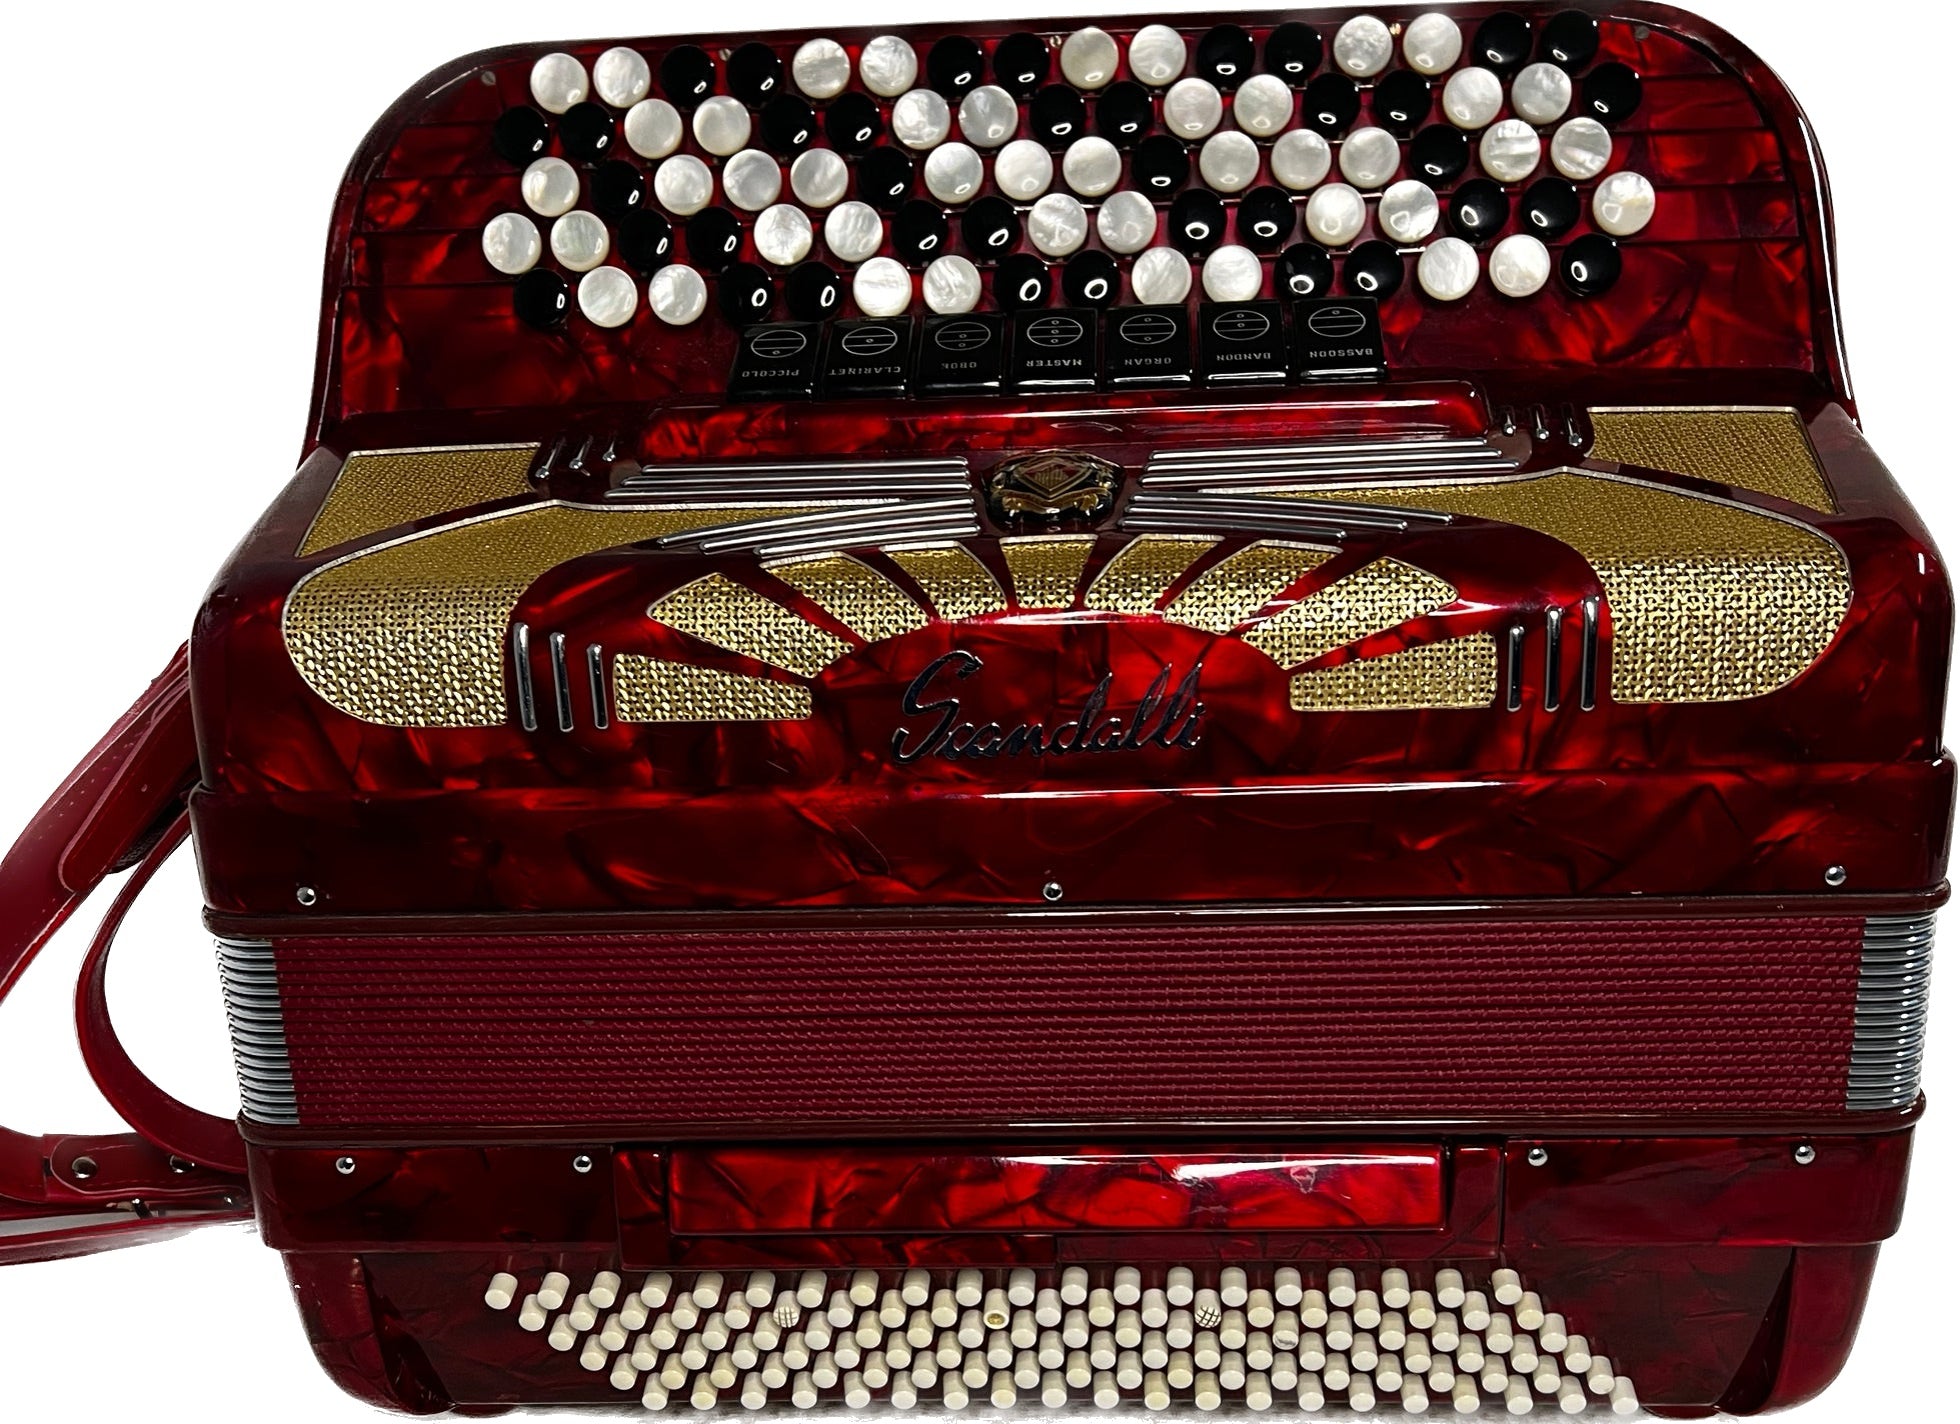 Scandalli 120 Bass C-System Button Accordion | Second-Hand